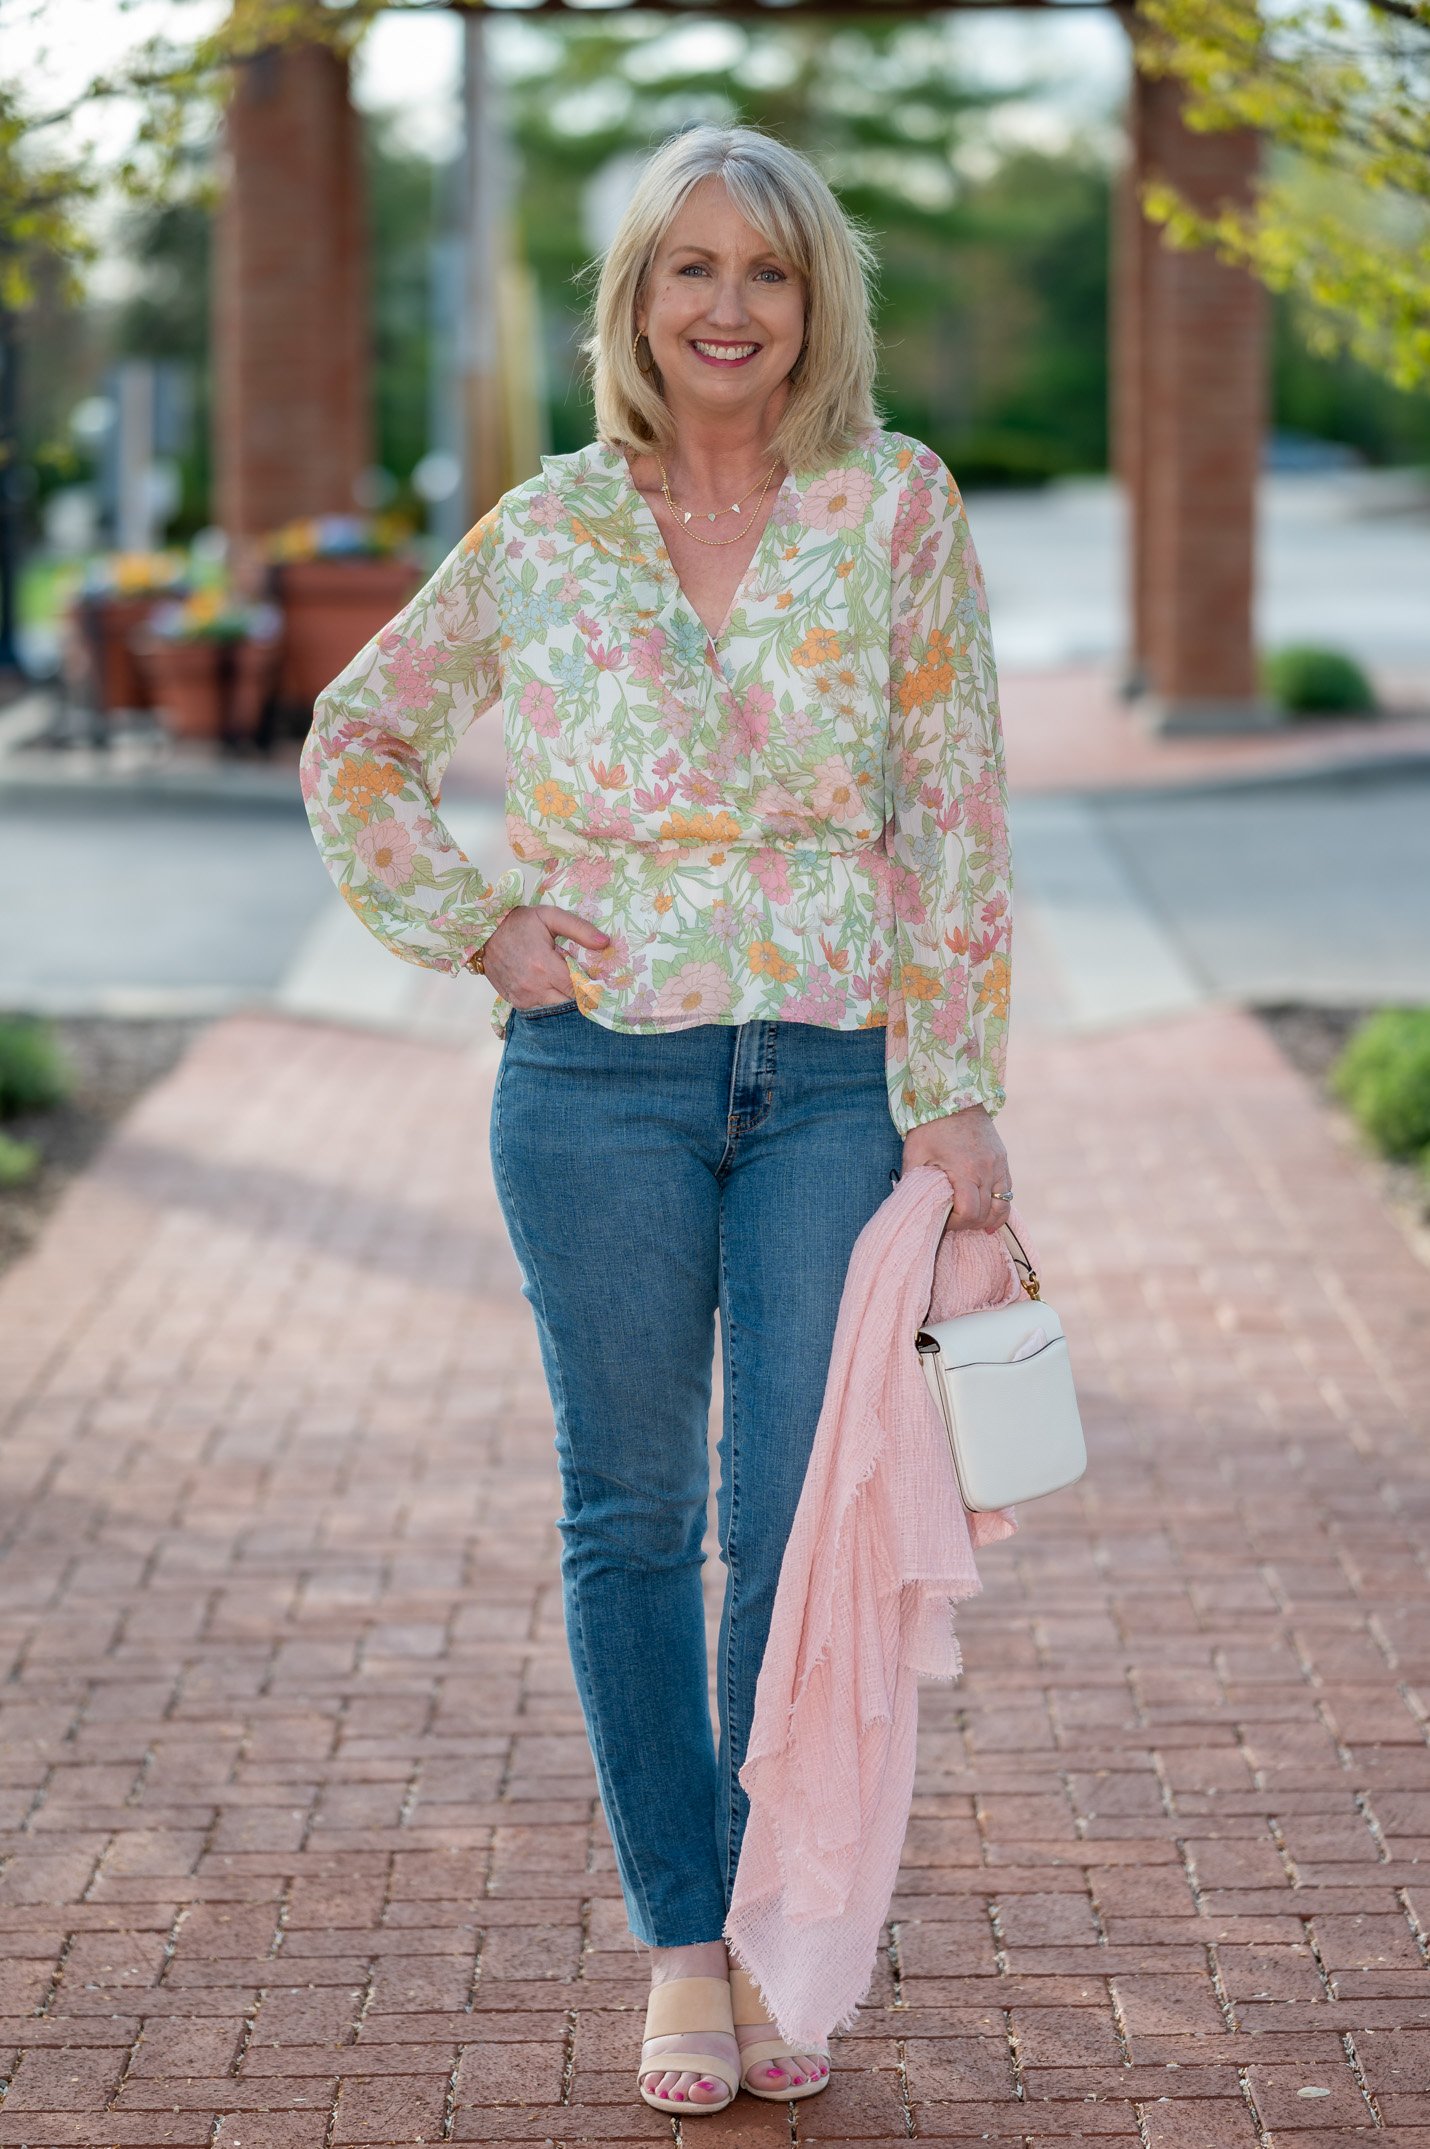 Floral Blouse + Jeans for Spring Date Night - Dressed for My Day